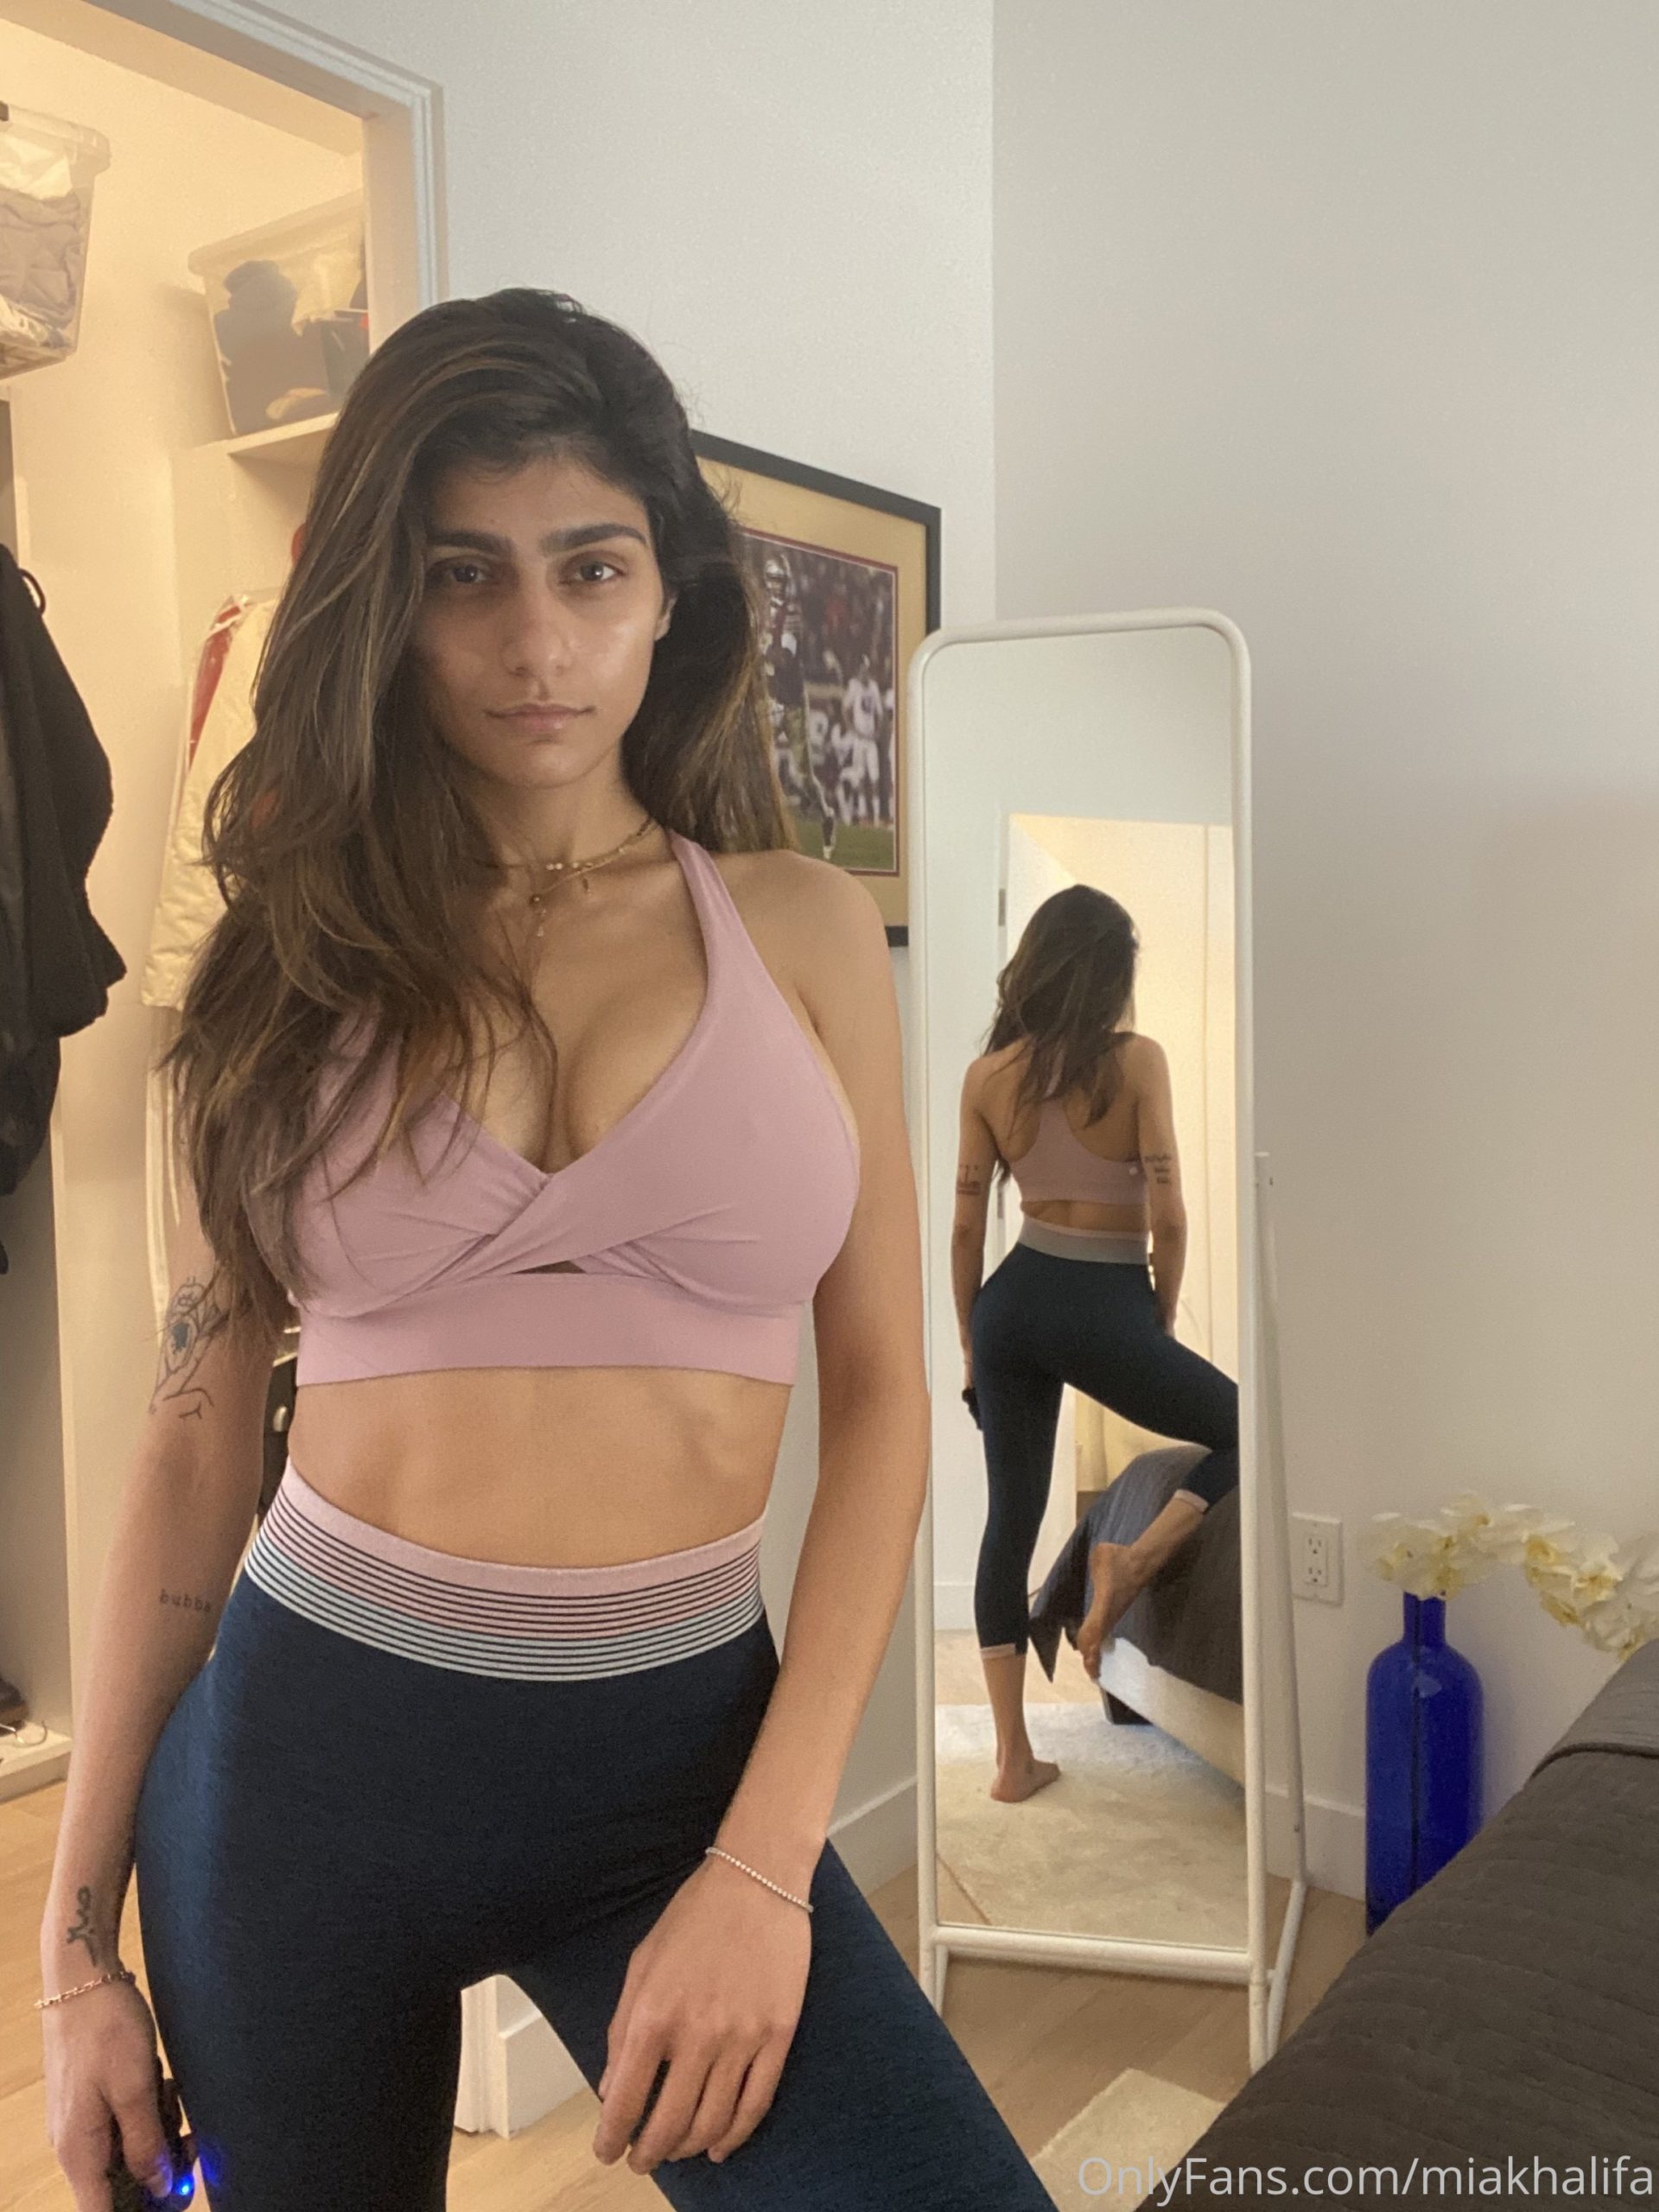 miakhalifa 18 09 2020 120683149 First post might delete later lol scaled